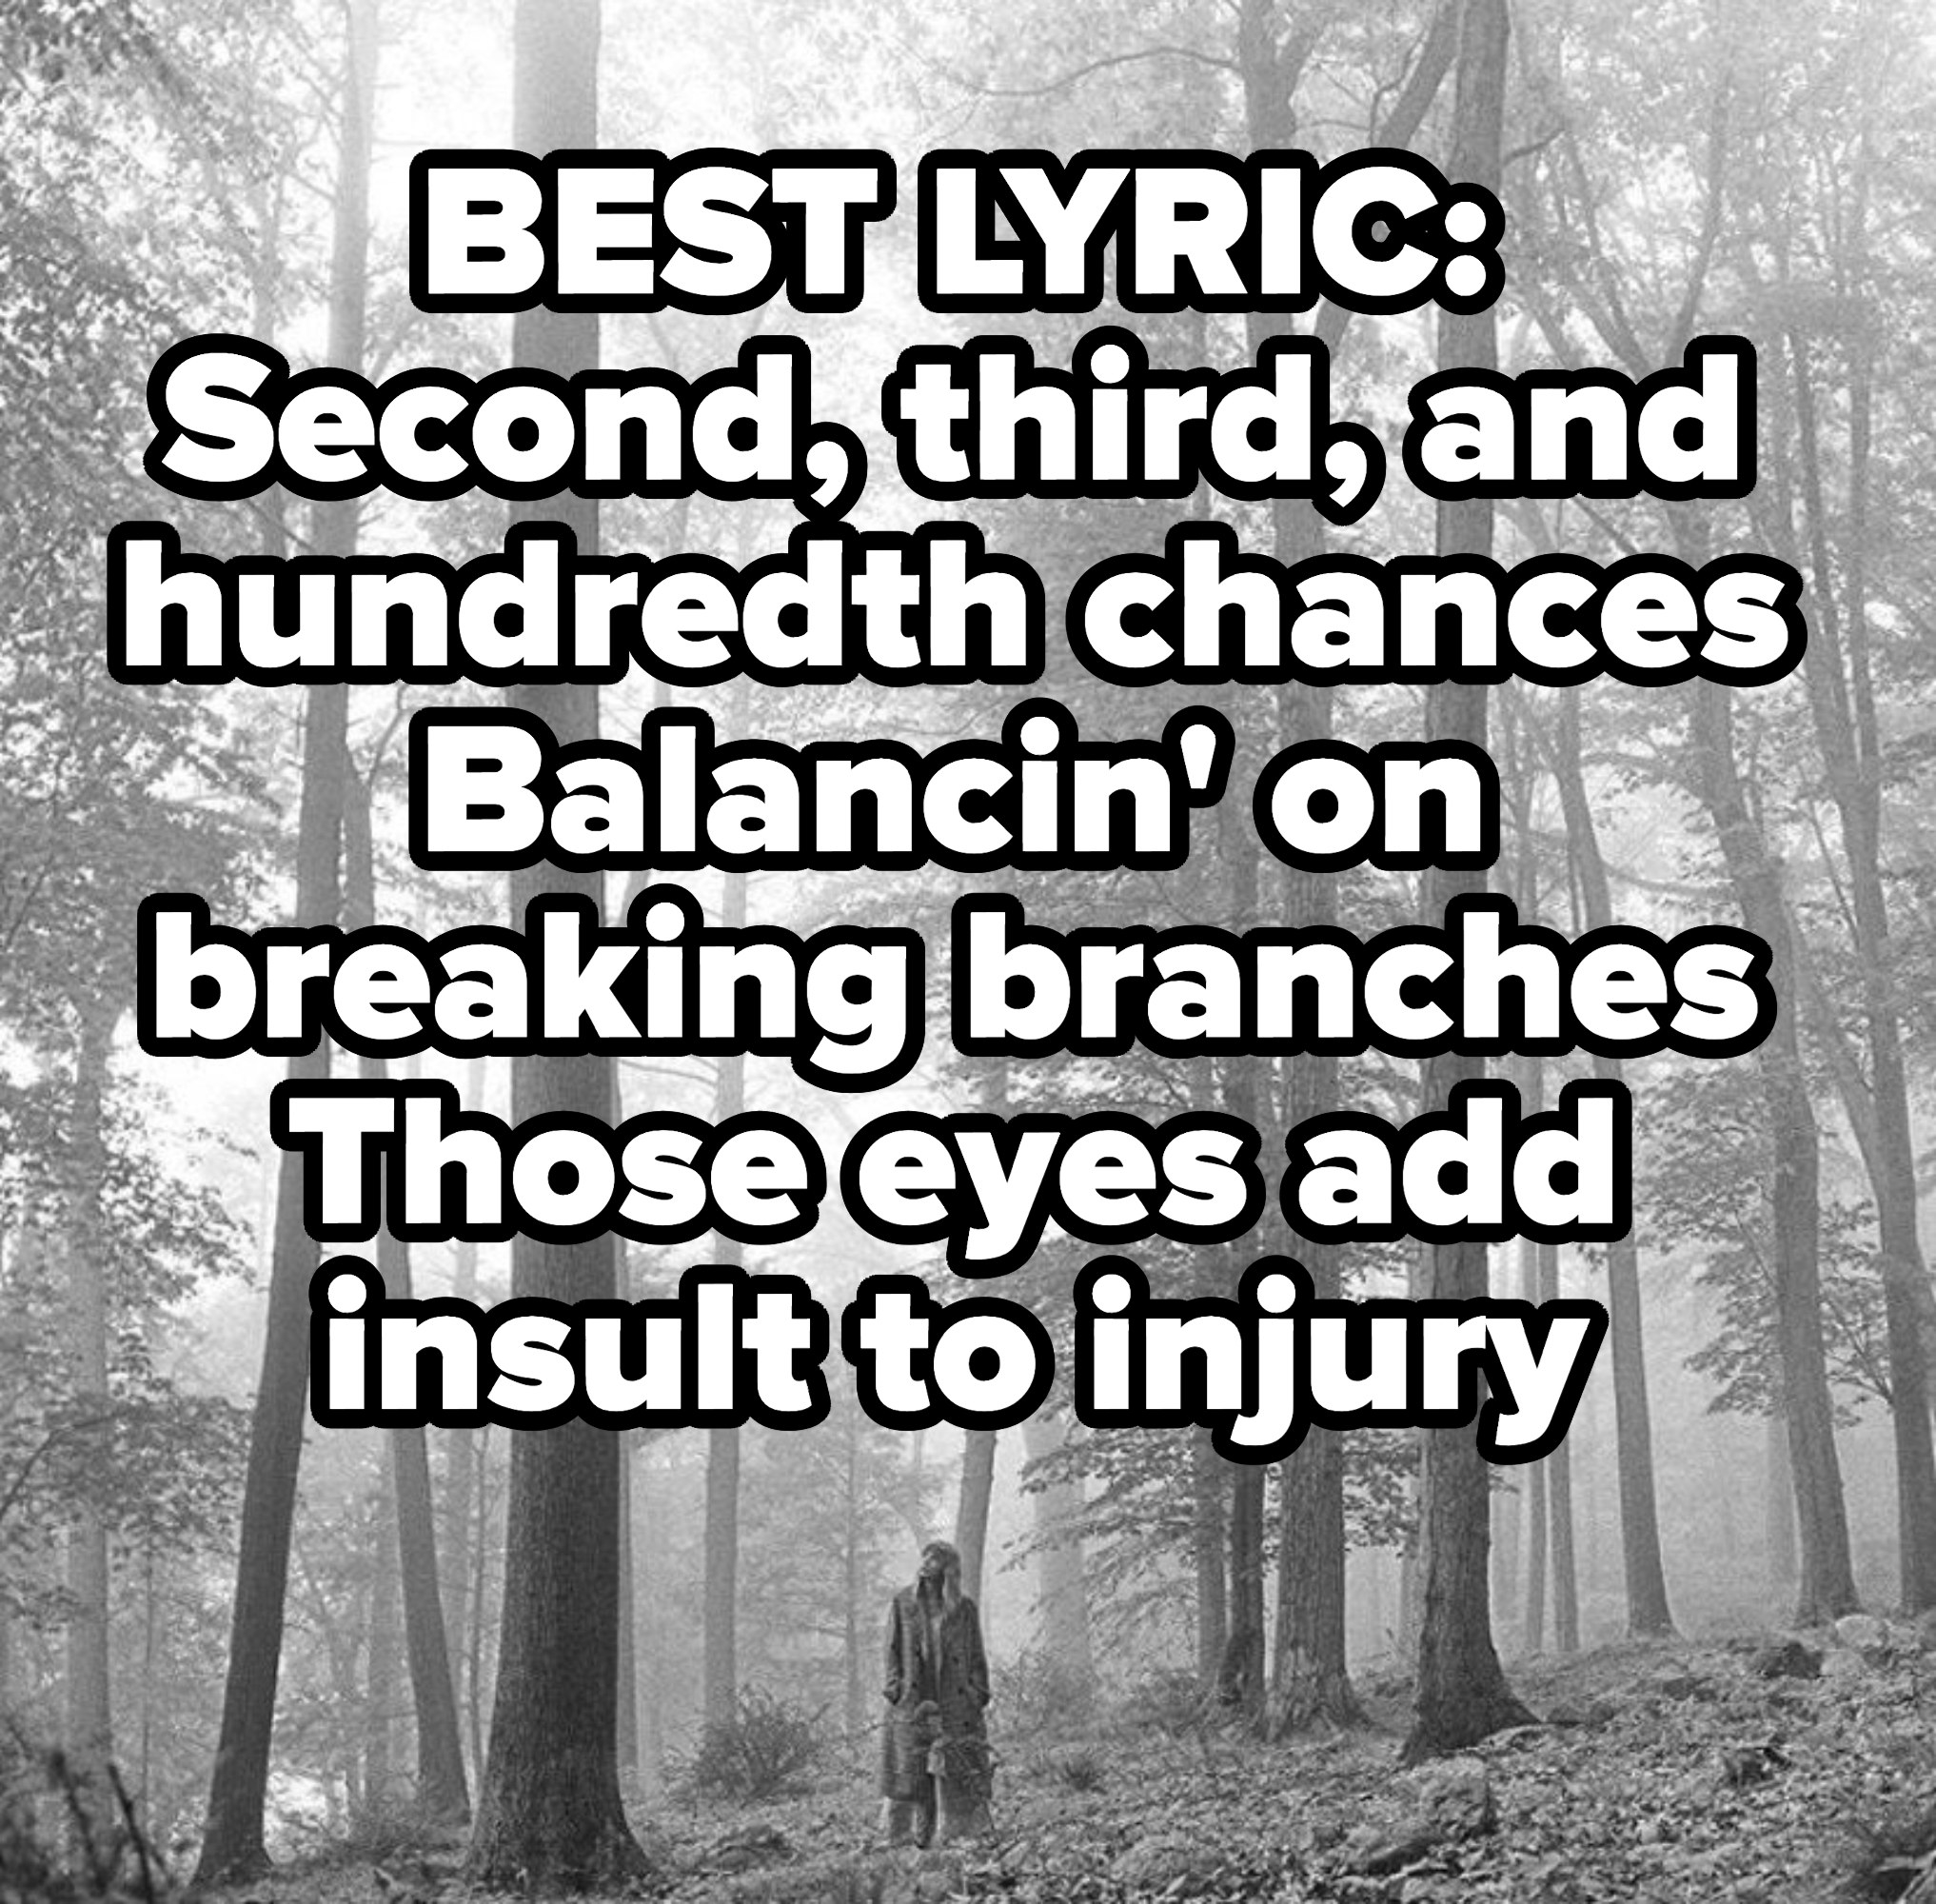 BEST LYRIC:
Second, third, and hundredth chances
Balancin&#x27; on breaking branches
Those eyes add insult to injury